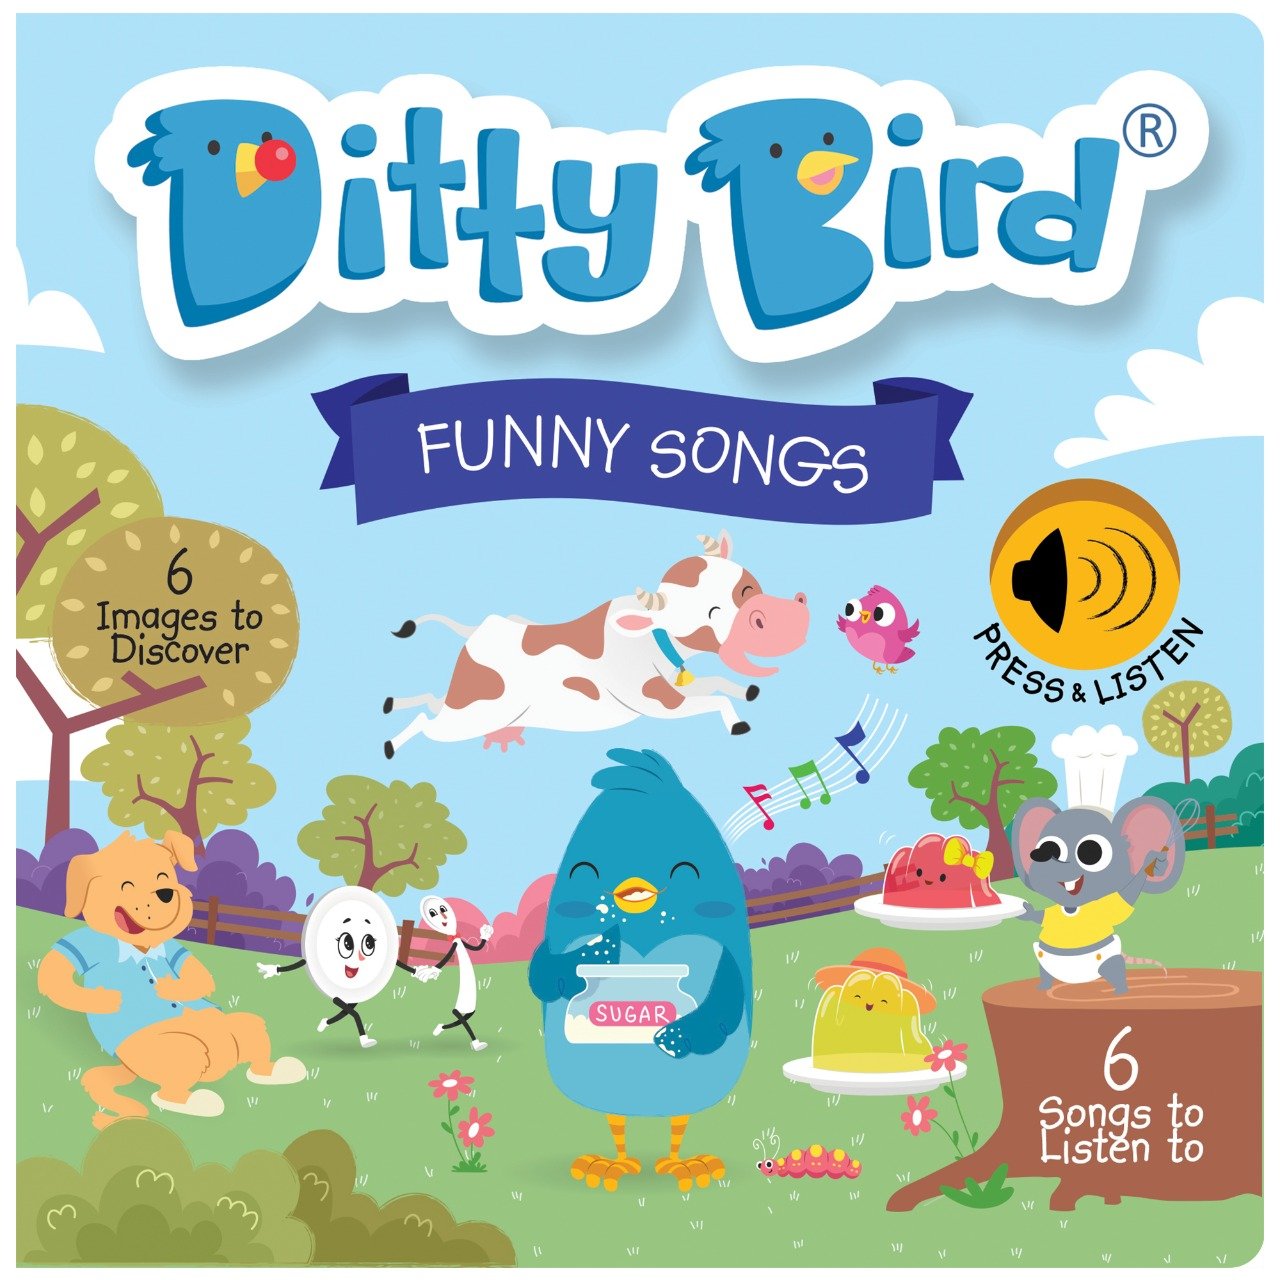 Funny Songs by Ditty Bird